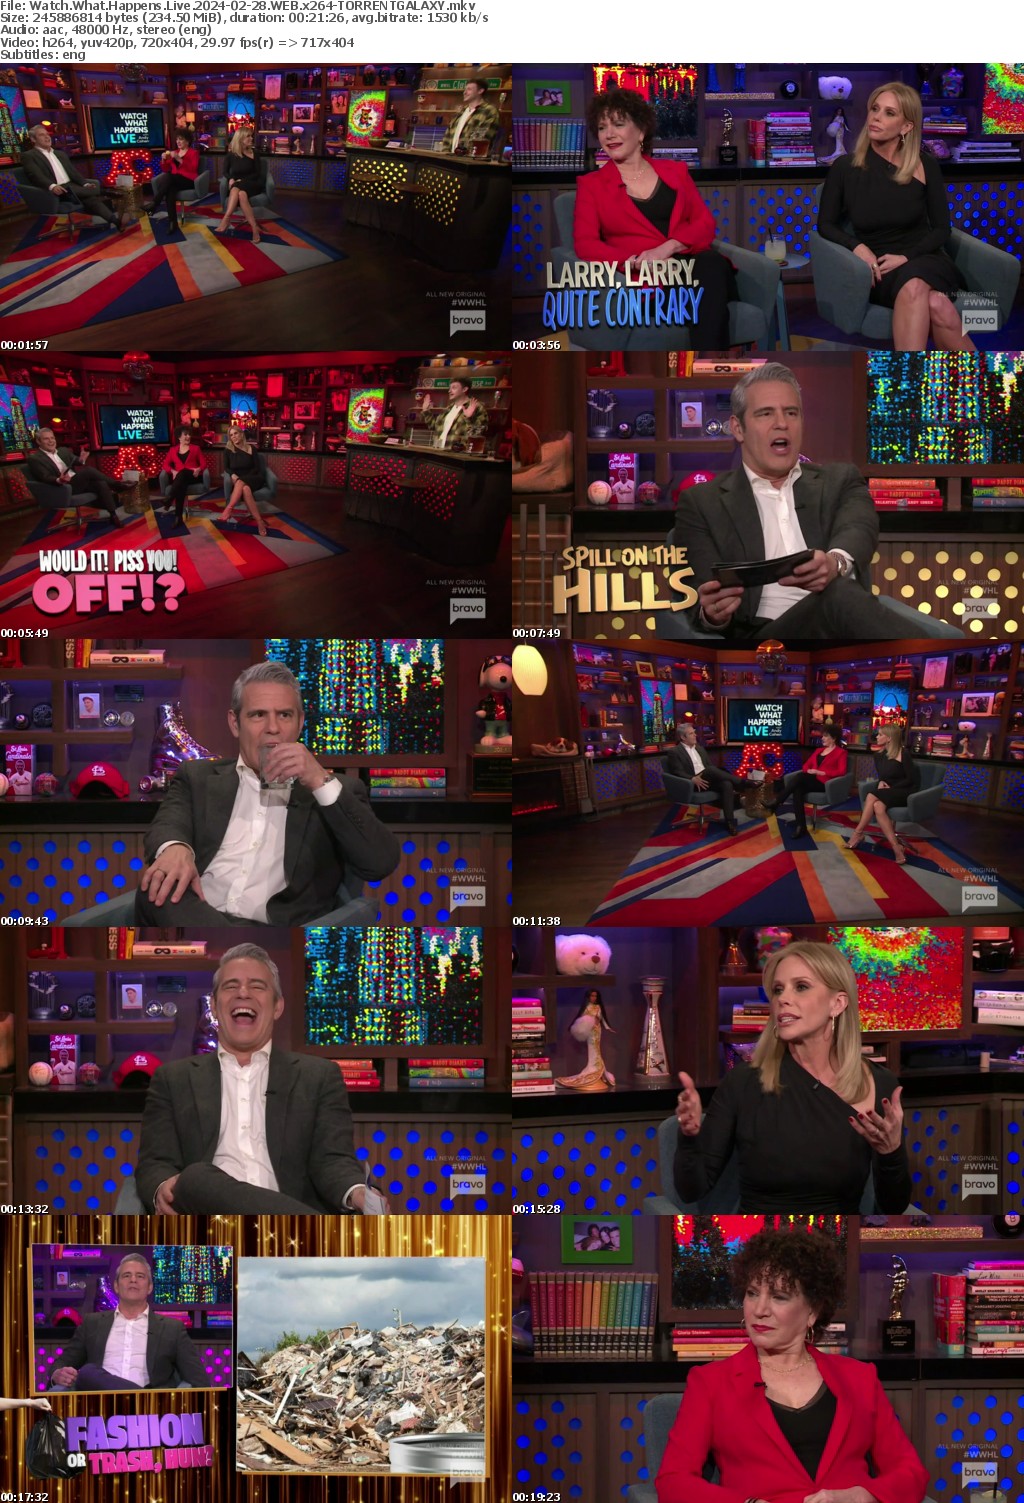 Watch What Happens Live 2024-02-28 WEB x264-GALAXY